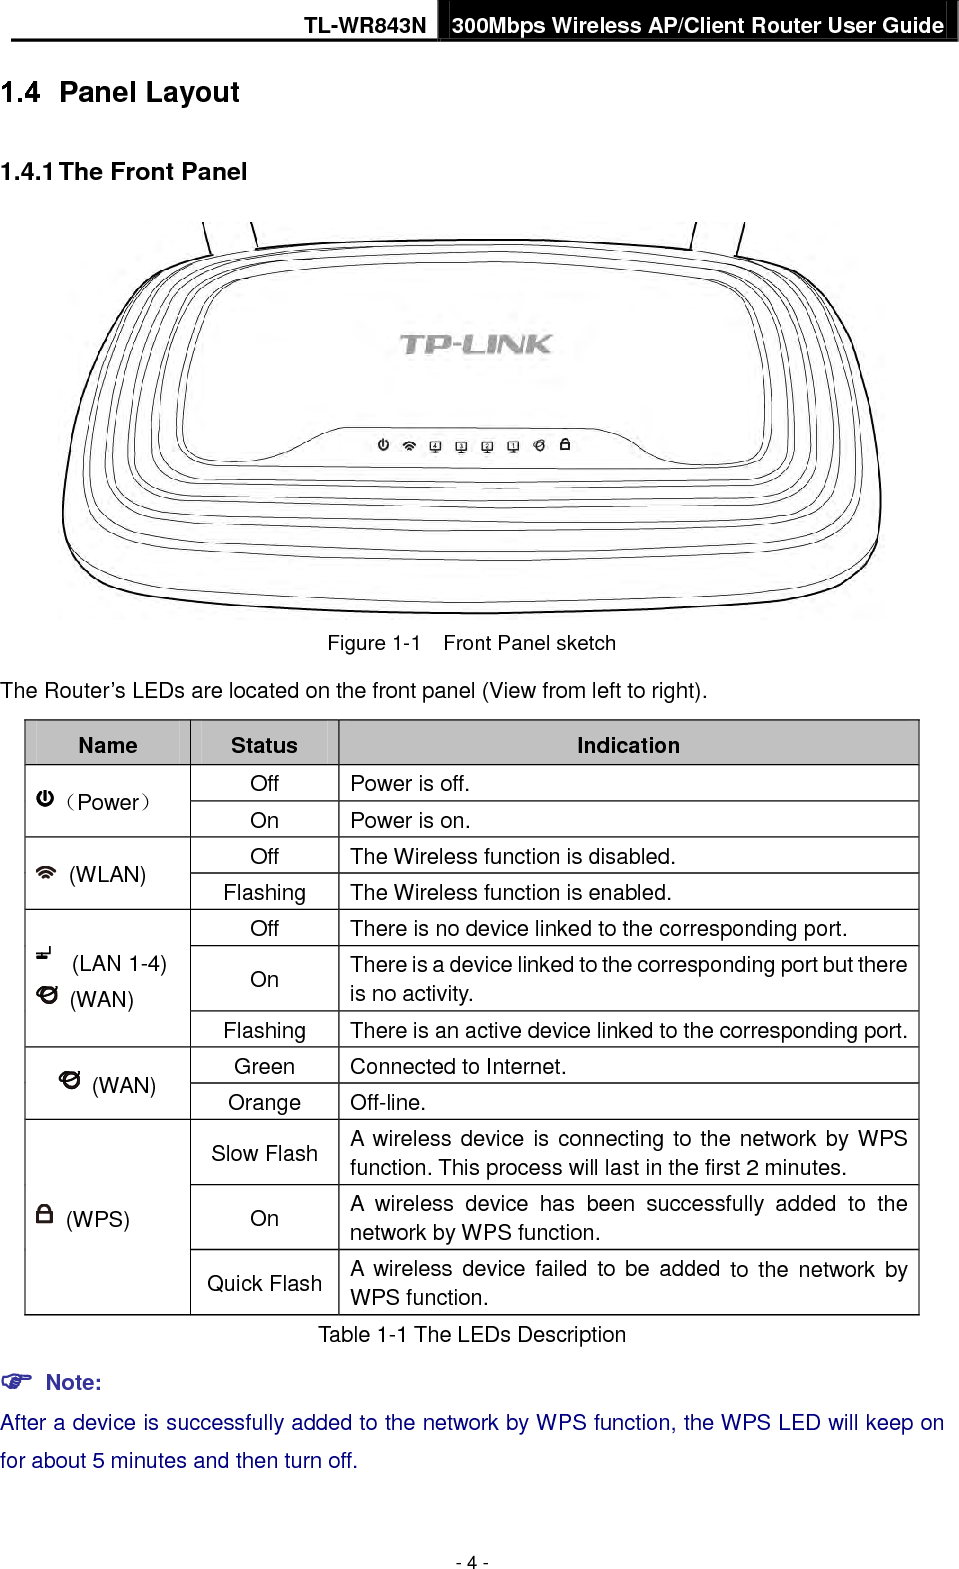 TL-WR843N 300Mbps Wireless AP/Client Router User Guide - 4 - Panel Layout 1.4.1 The Front Panel Figure 1-1    Front Panel sketch The Router’s LEDs are located on the front panel (View from left to right). Name Status Indication （Power） Off Power is off. On Power is on. (WLAN)  Off The Wireless function is disabled. Flashing The Wireless function is enabled. (LAN 1-4) (WAN) Off There is no device linked to the corresponding port. On There is a device linked to the corresponding port but there is no activity. Flashing There is an active device linked to the corresponding port. (WAN)  Green Connected to Internet. Orange Off-line. (WPS) Slow Flash A wireless device is connecting to the network by WPS function. This process will last in the first 2 minutes. On A  wireless  device has been successfully added to the network by WPS function.   Quick Flash A  wireless  device failed to be added to the network by WPS function. Table 1-1 The LEDs Description  Note:After a device is successfully added to the network by WPS function, the WPS LED will keep on for about 5 minutes and then turn off.   